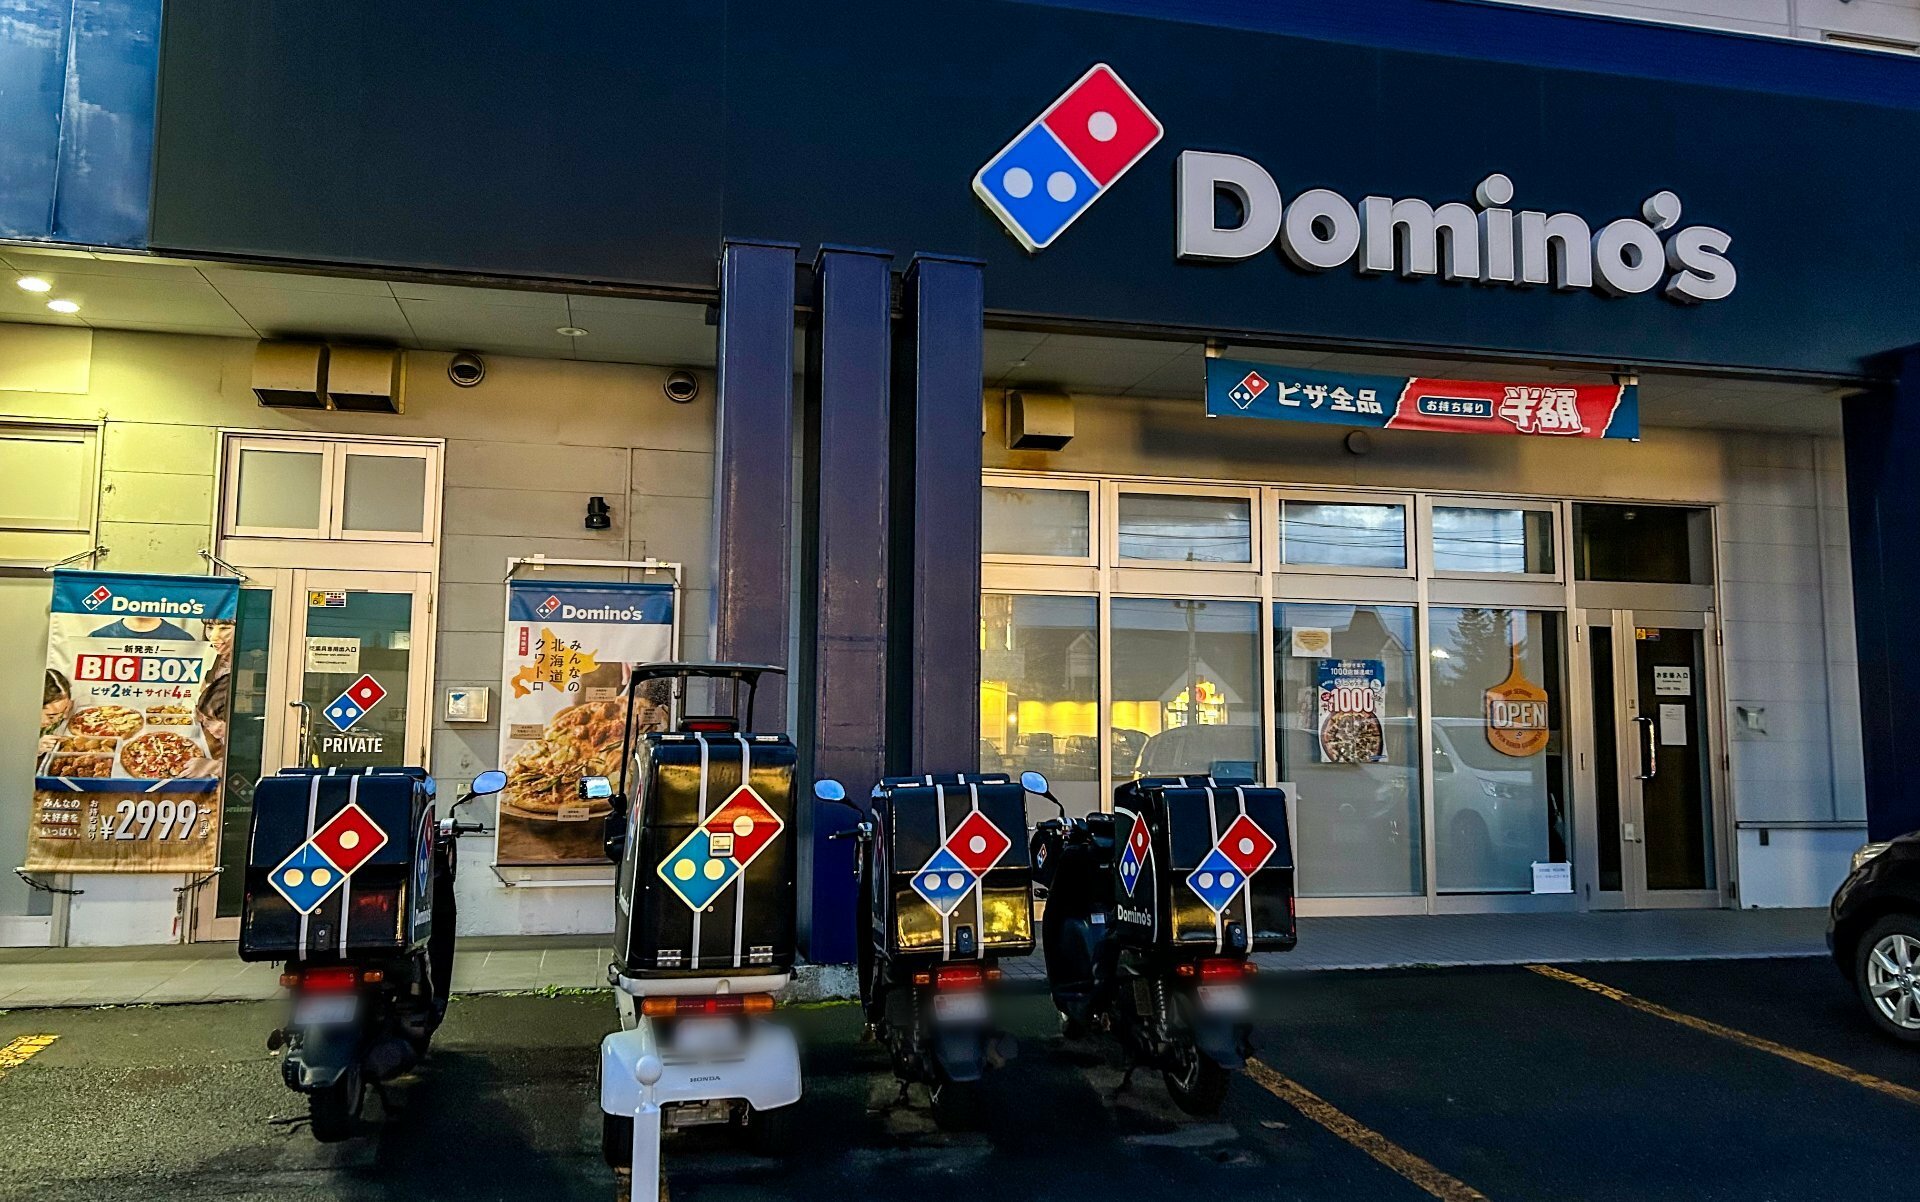 DOMINO'S PIZZA 永山パワーズ店の写真です。